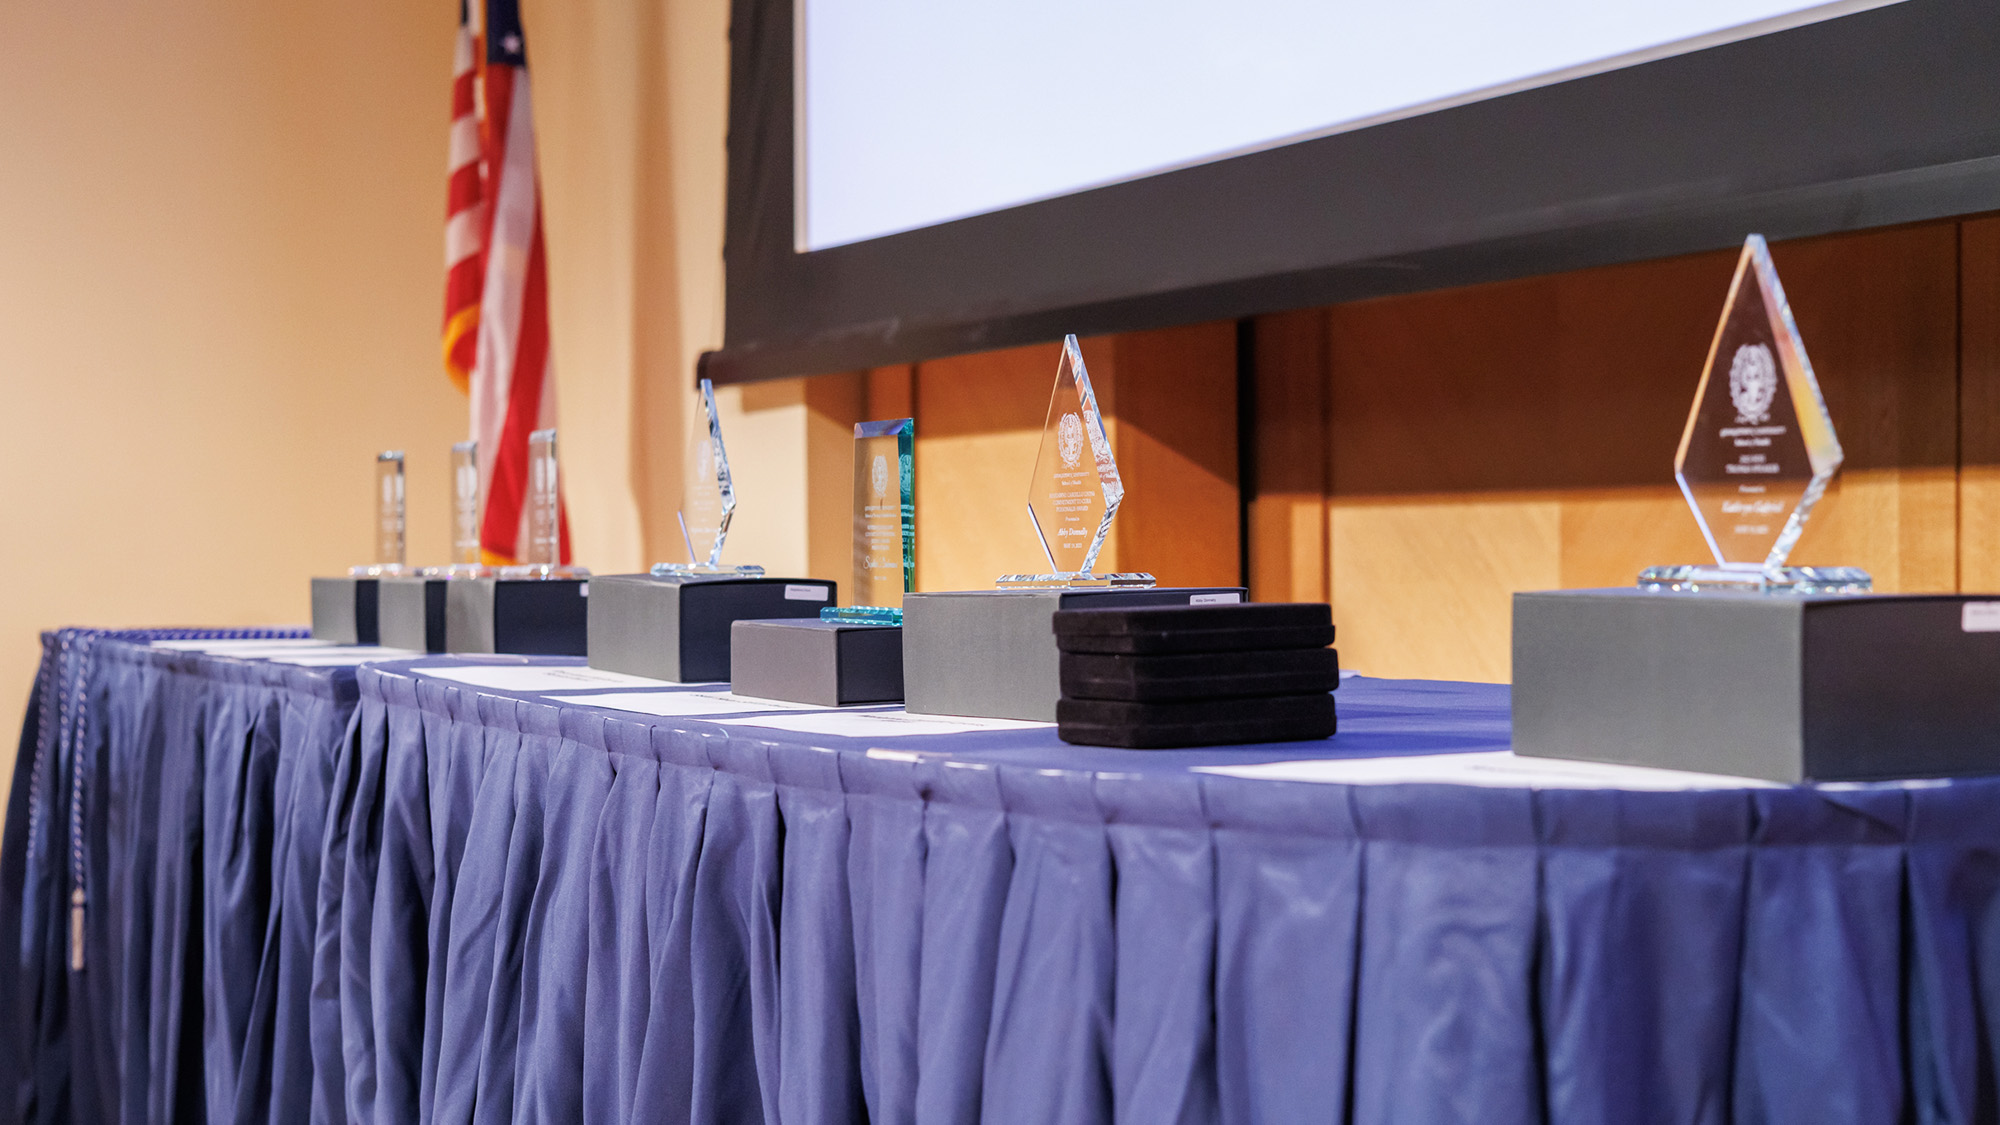 A table draped in blue tablecloth on which glass awards are arranged